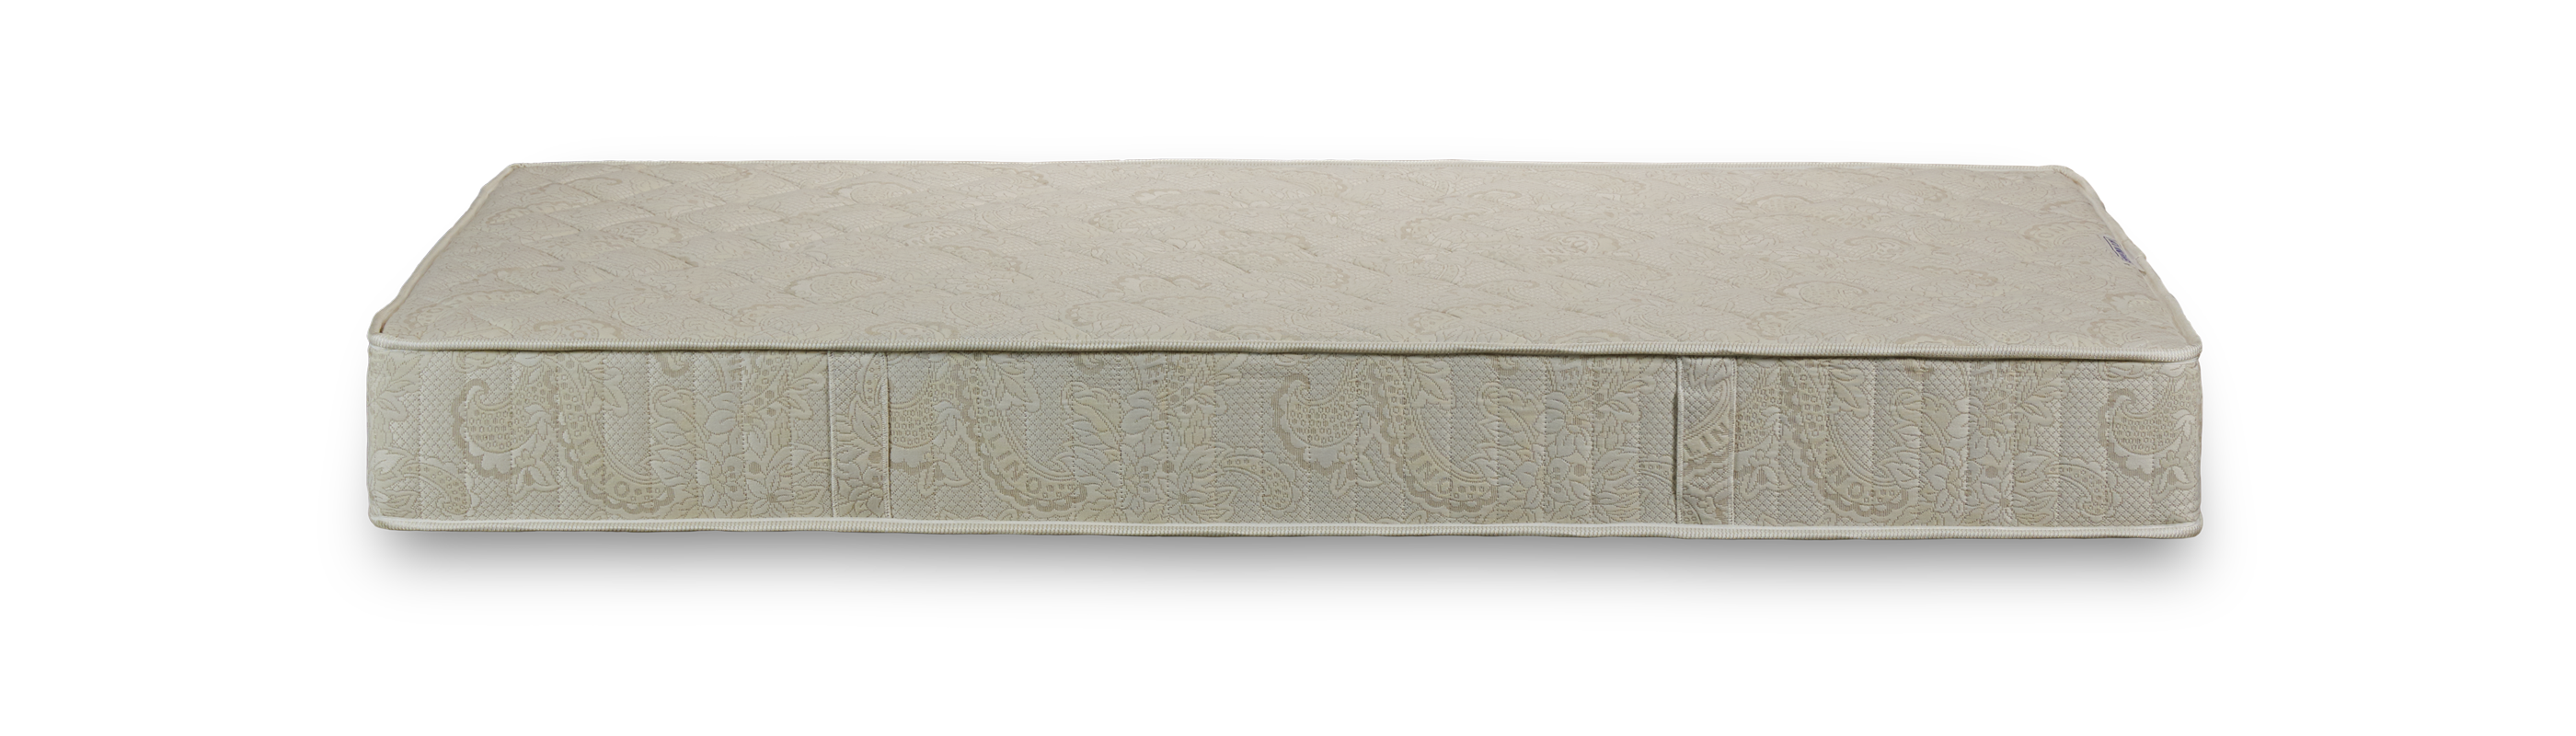 Orthopaedic quilted spring mattress | Relax 